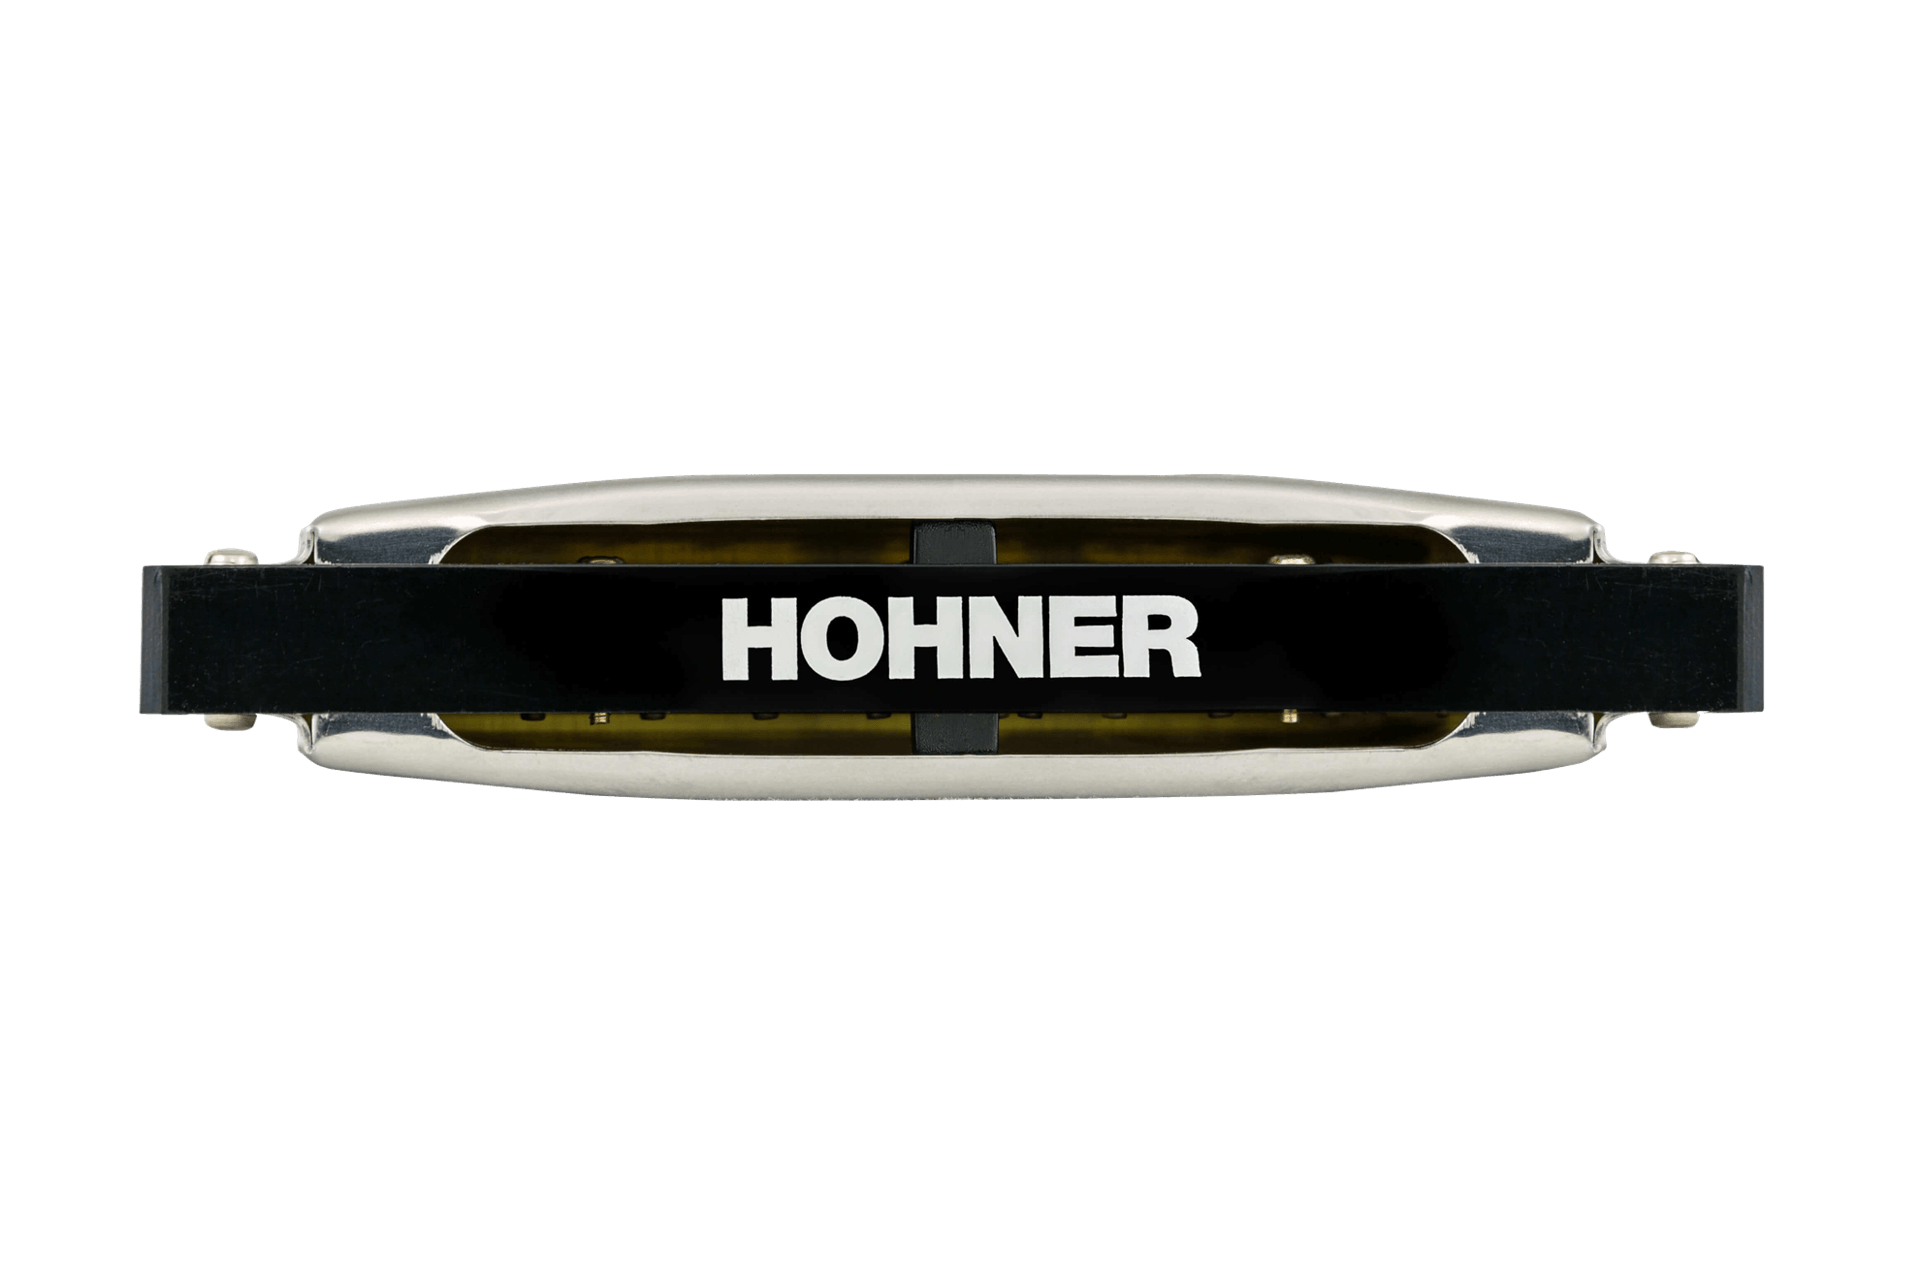 D Harmonica 504/20 - Harmonicas by Hohner at Muso's Stuff